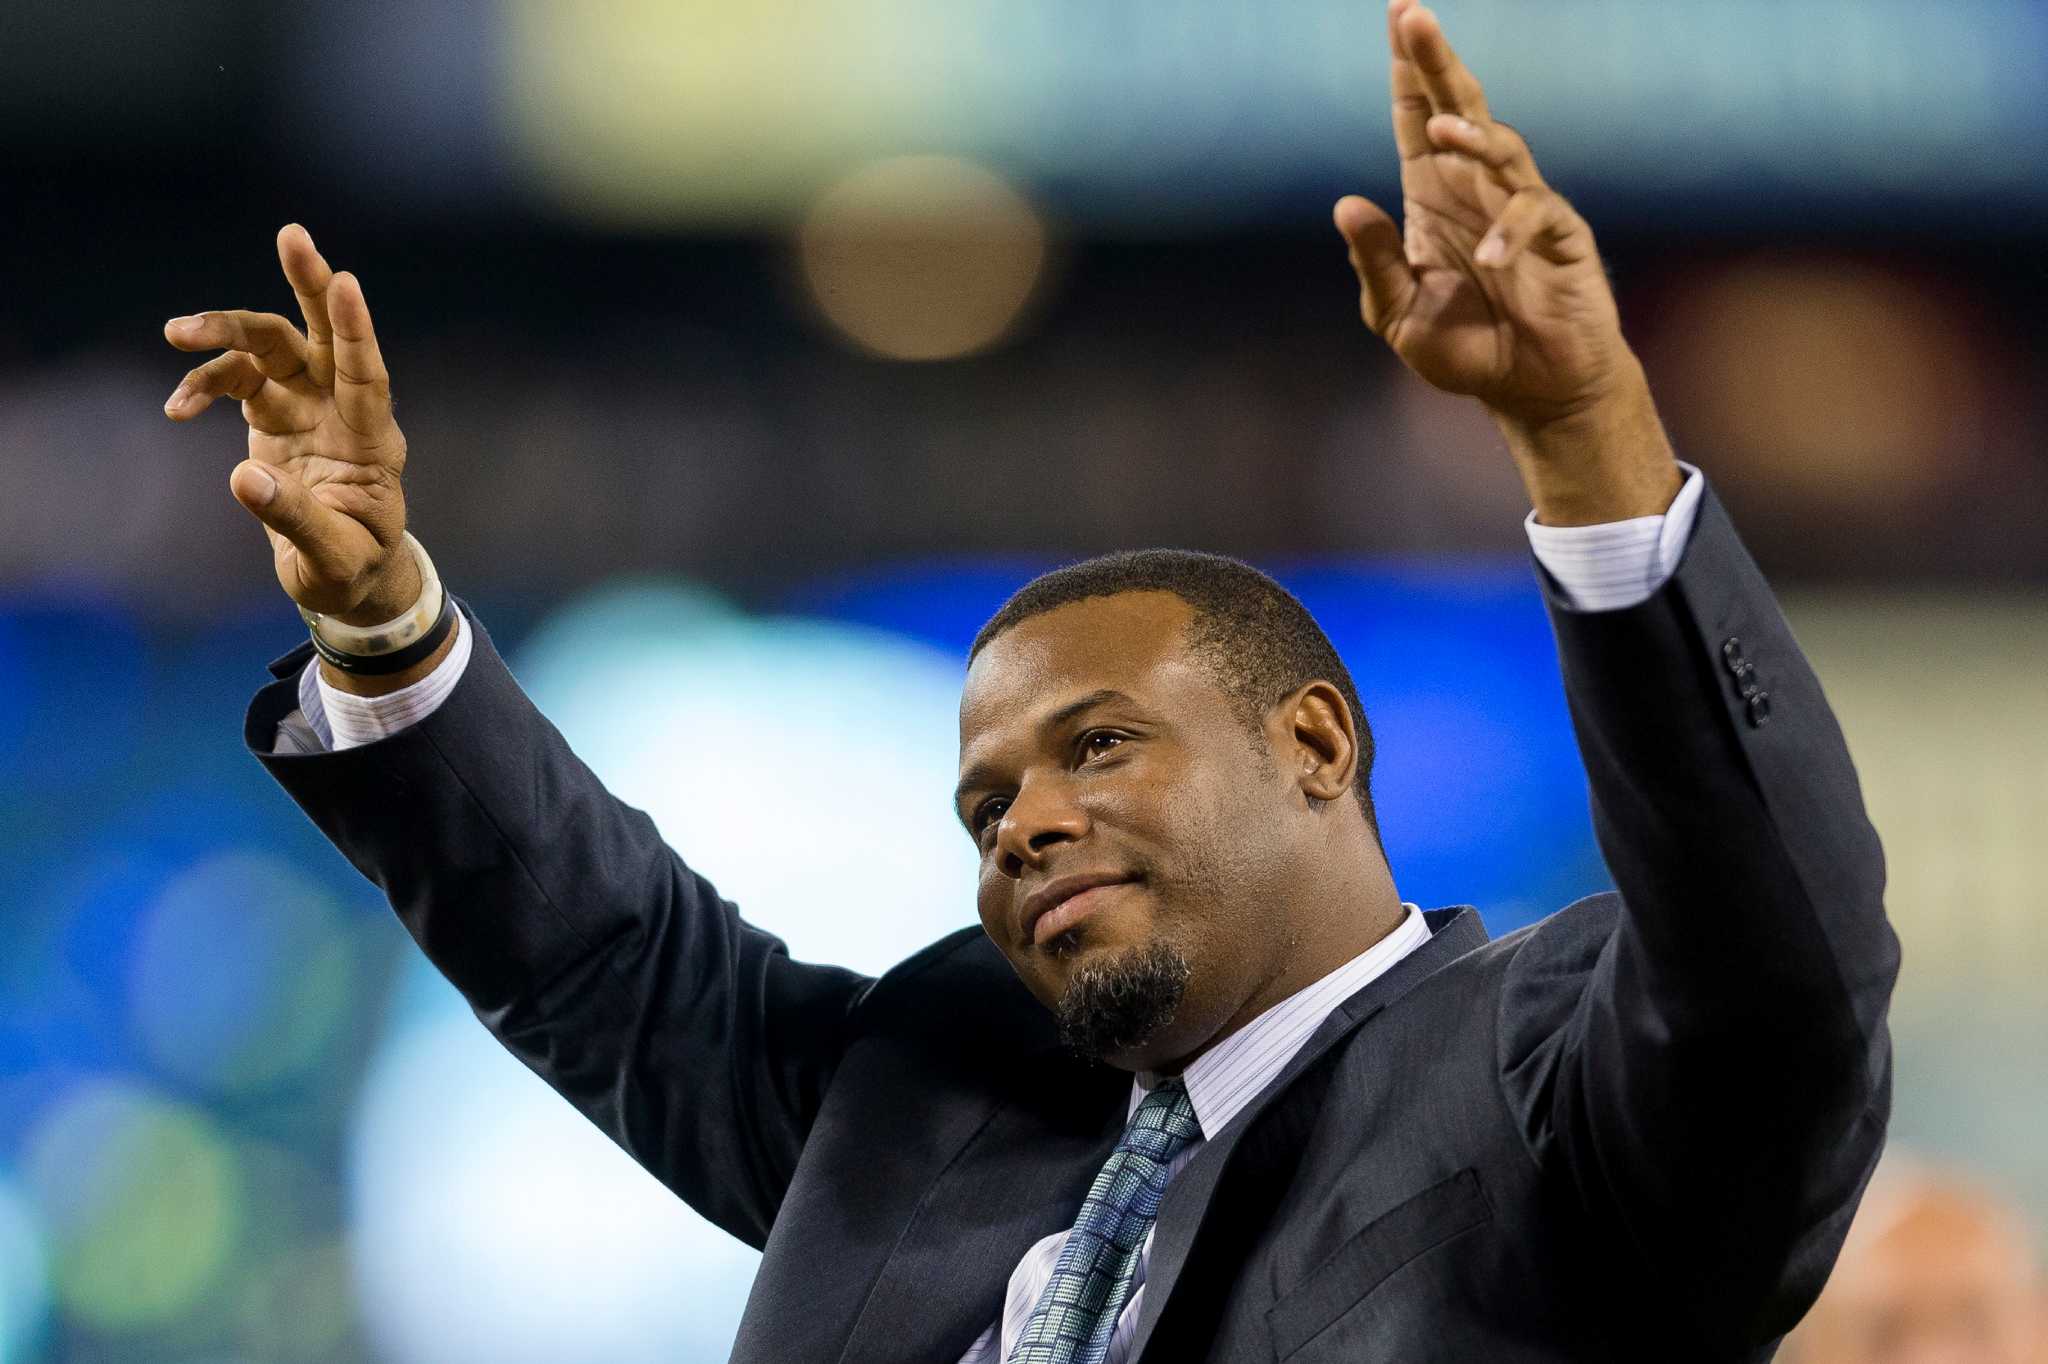 Seattle Mariners' Ken Griffey Jr, waves to the crowd before